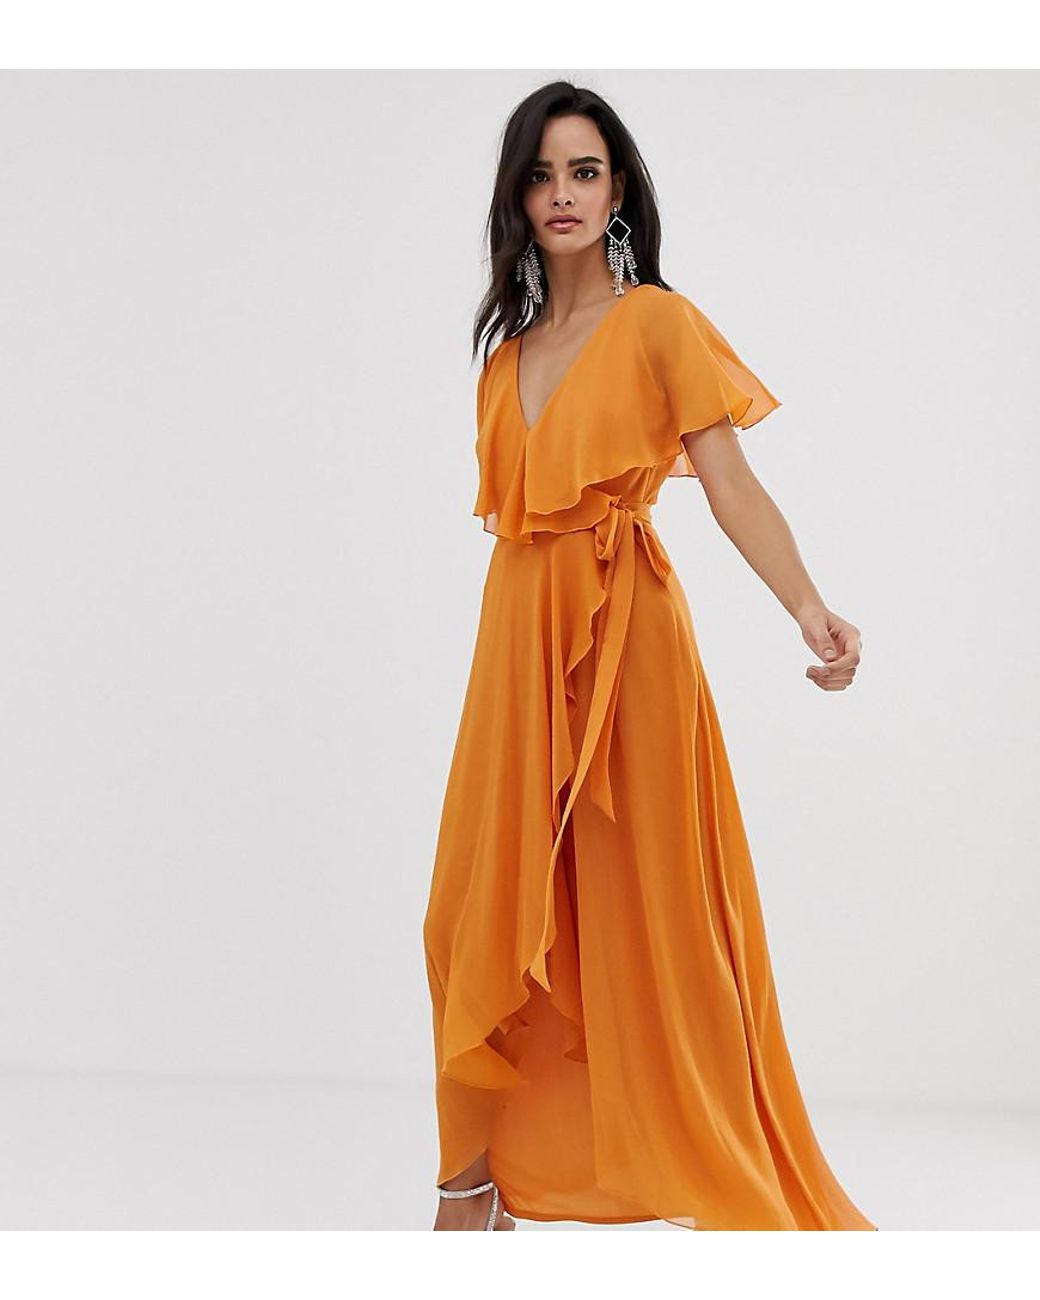 ASOS Maxi Dress With Cape Back And Dipped Hem in Orange - Lyst